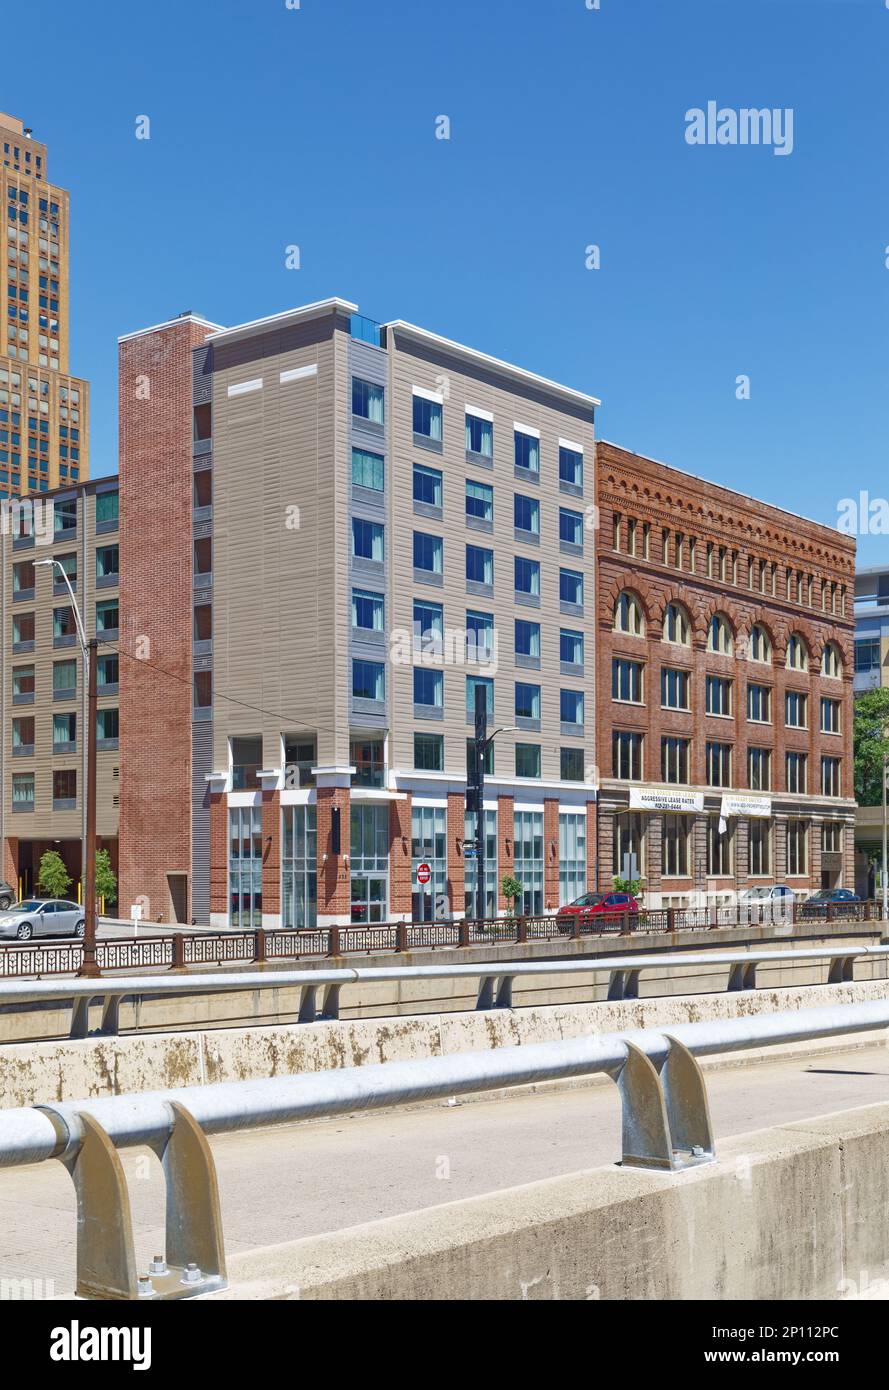 Pittsburgh Downtown: Fairfield Inn & Suites is a modern brick-and-terra cotta-clad mid-rise hotel, opened in 2019, overlooking Monongahela River. Stock Photo